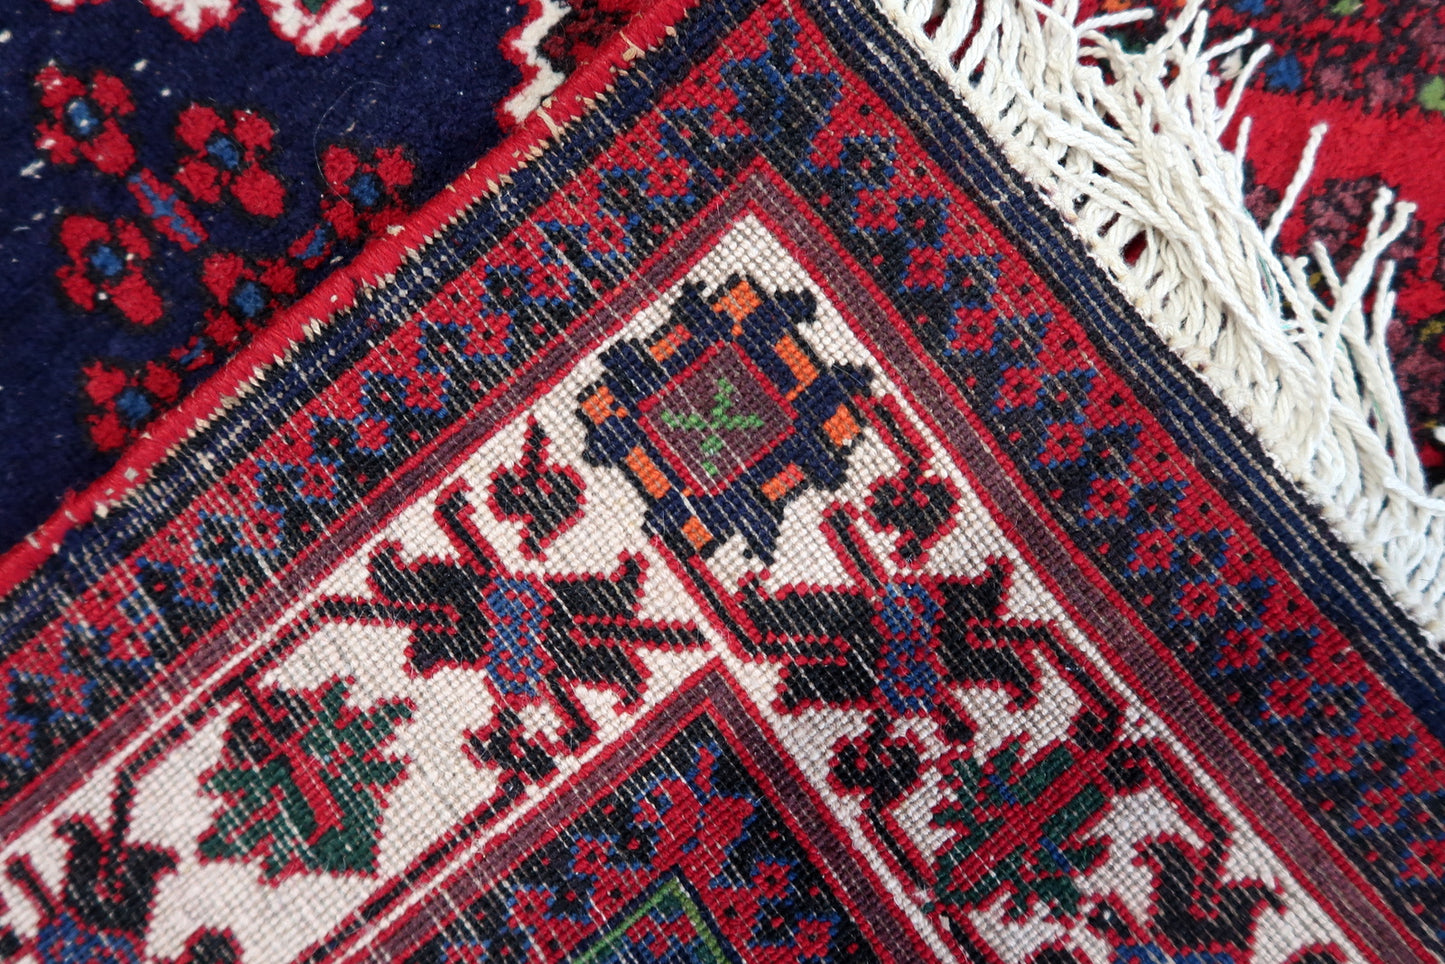 Reverse View of Classic Persian Rug